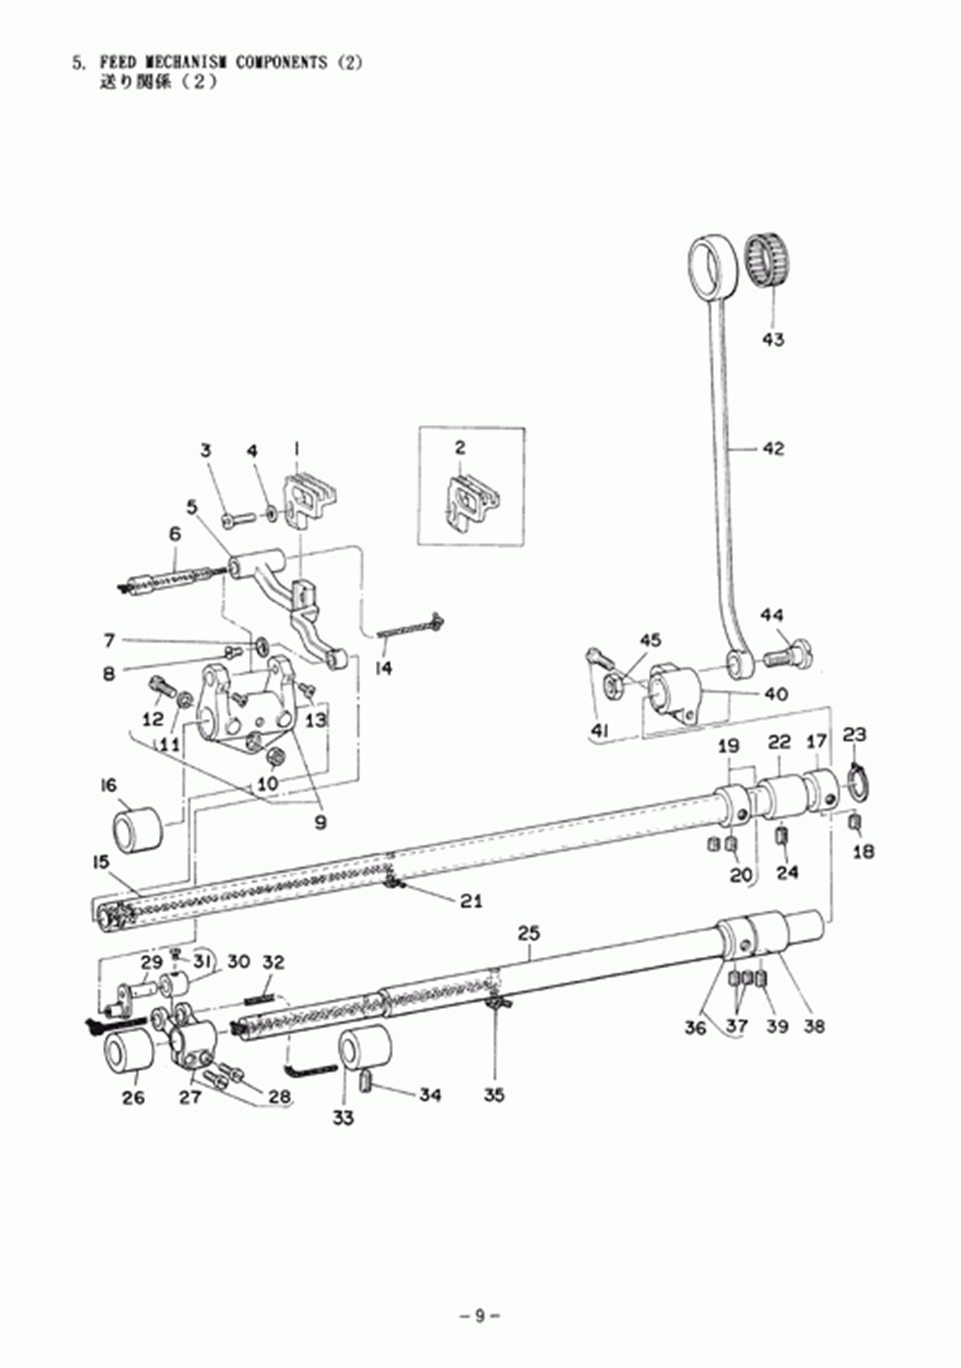 MH-382 - 5. FEED MECHANISM COMPONENTS (2)